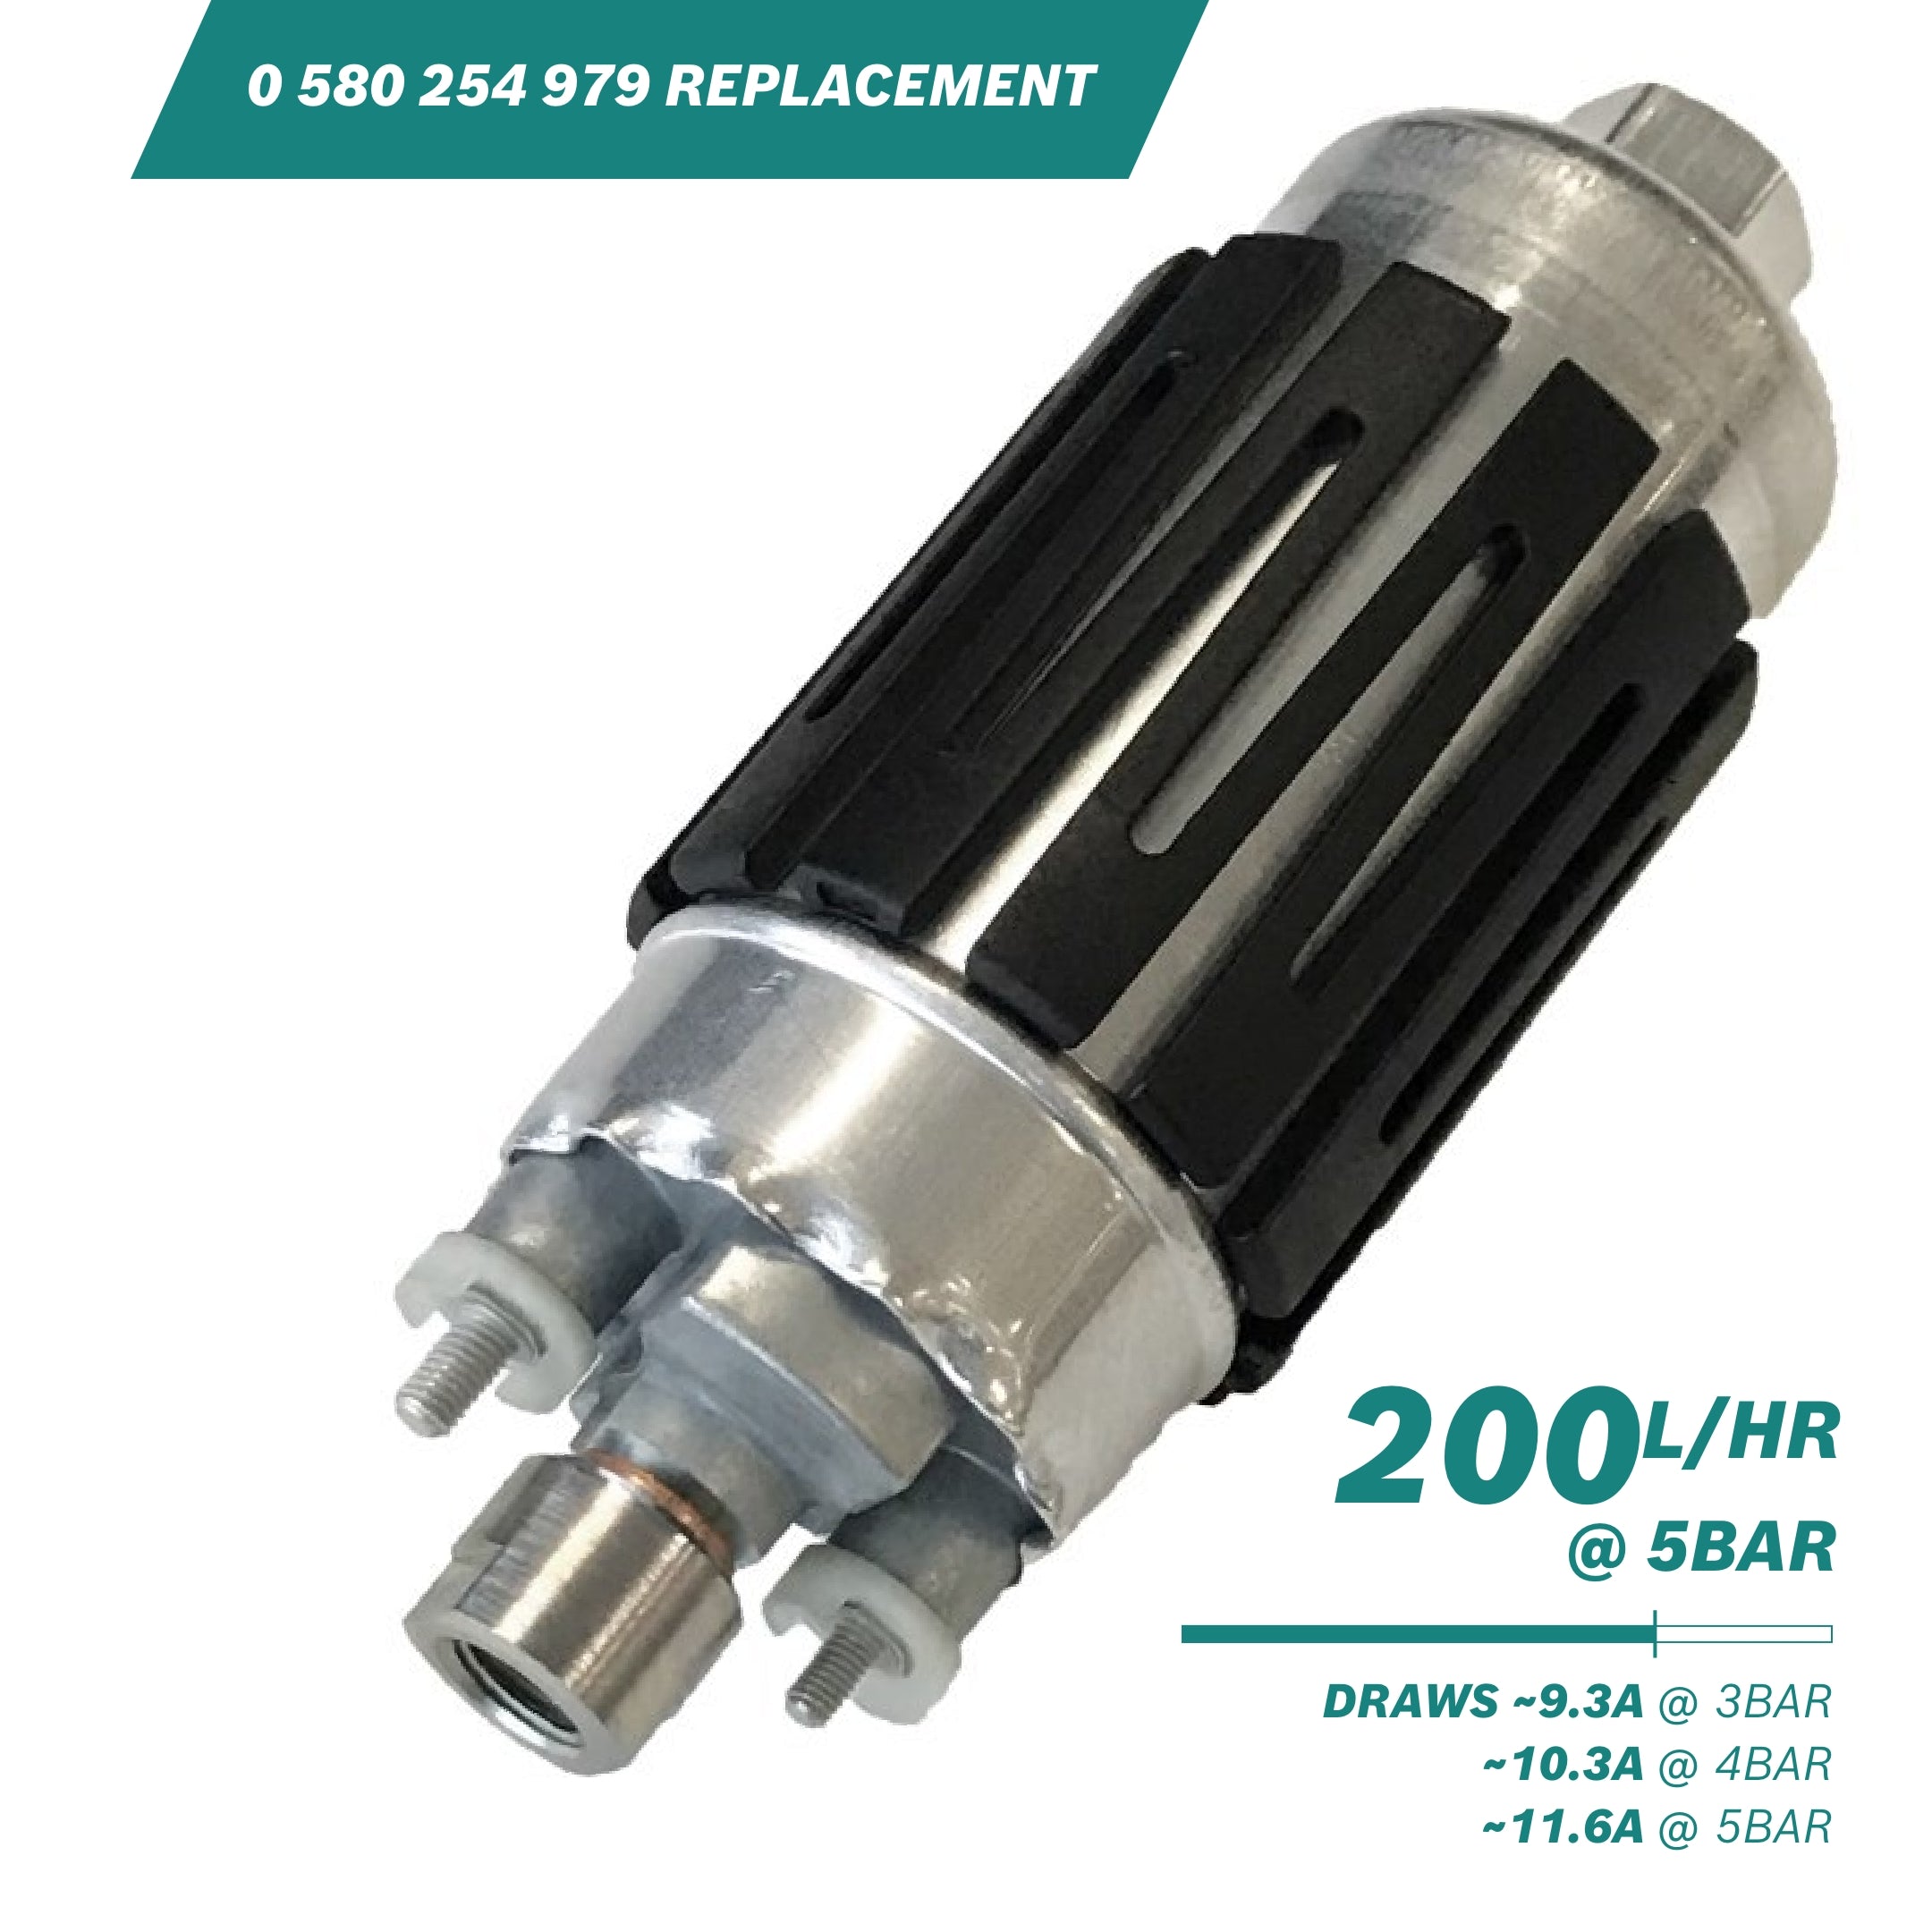 >200l/h @5bar In-line Fuel Pump replacement 0 580 254 979